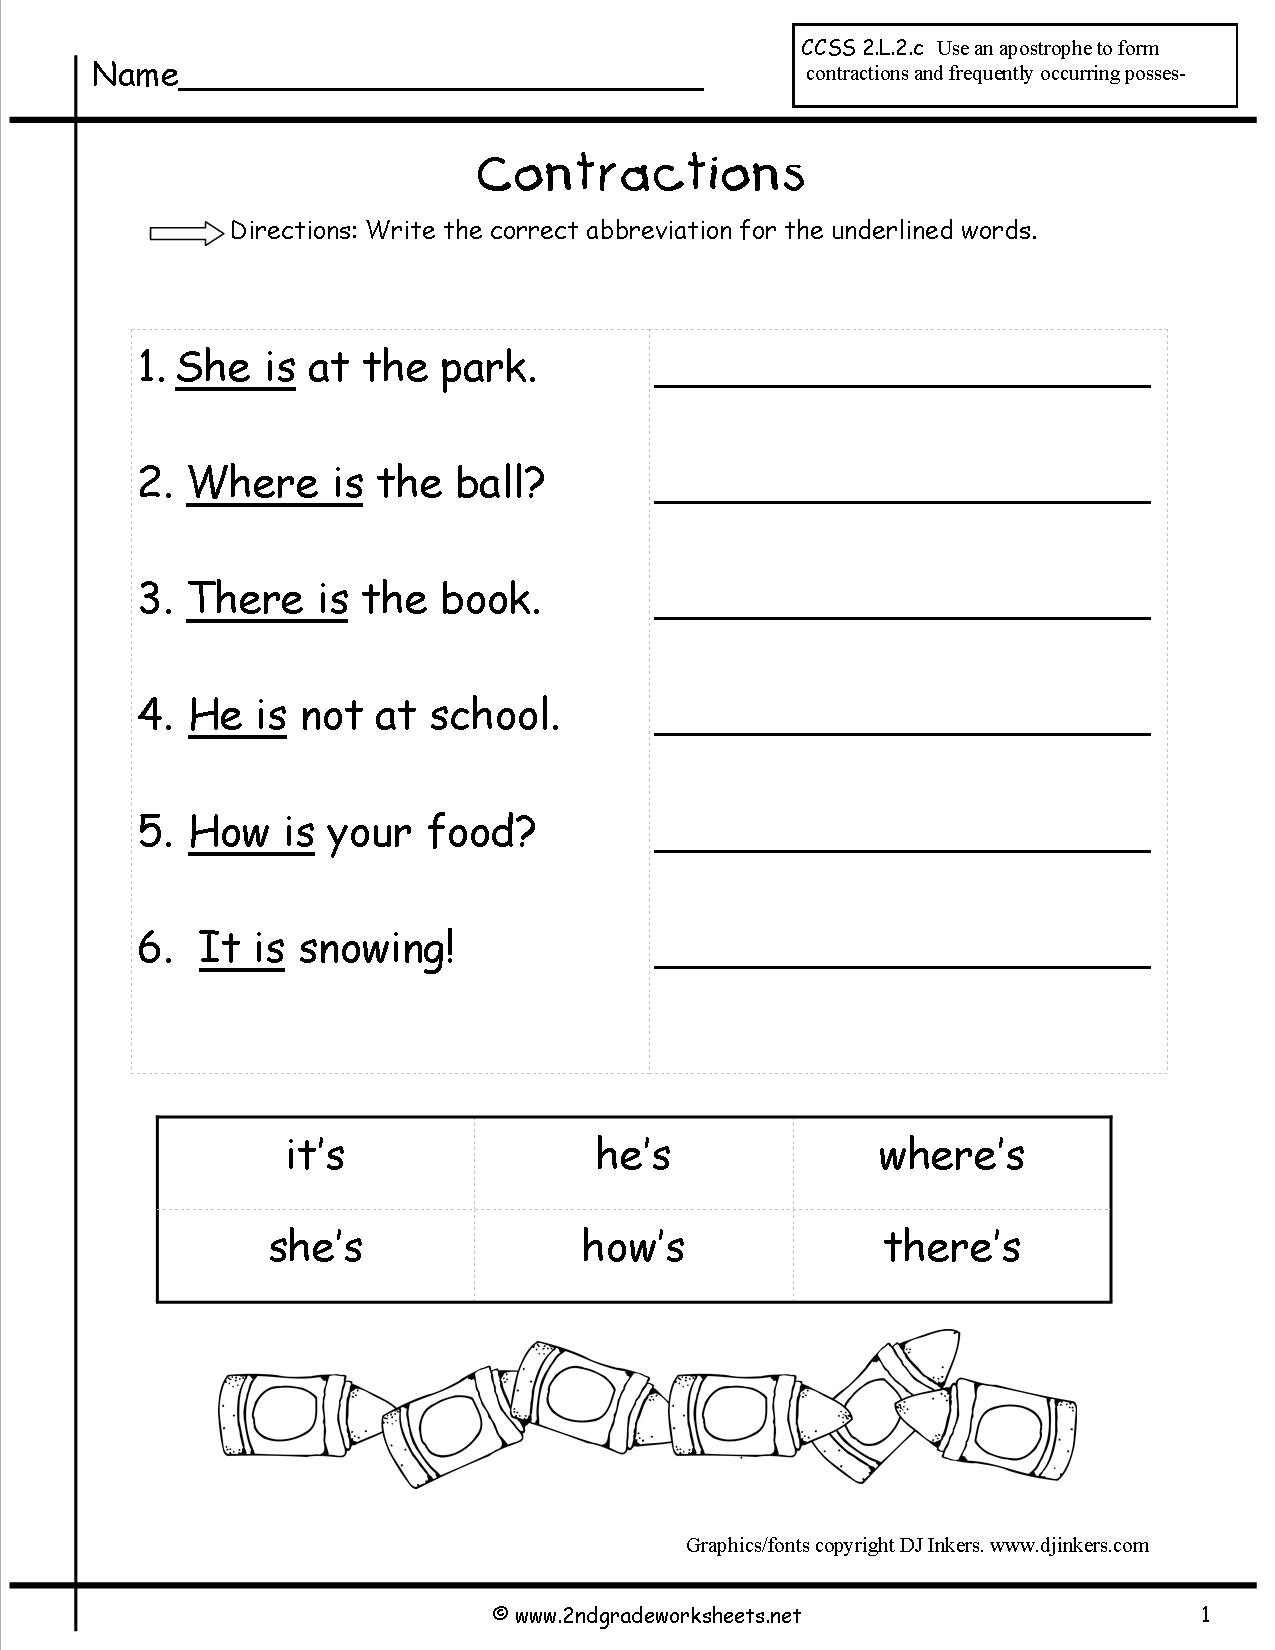 Contractions Worksheet 3rd Grade Free Contractions Worksheets and Printouts Contraction 3rd